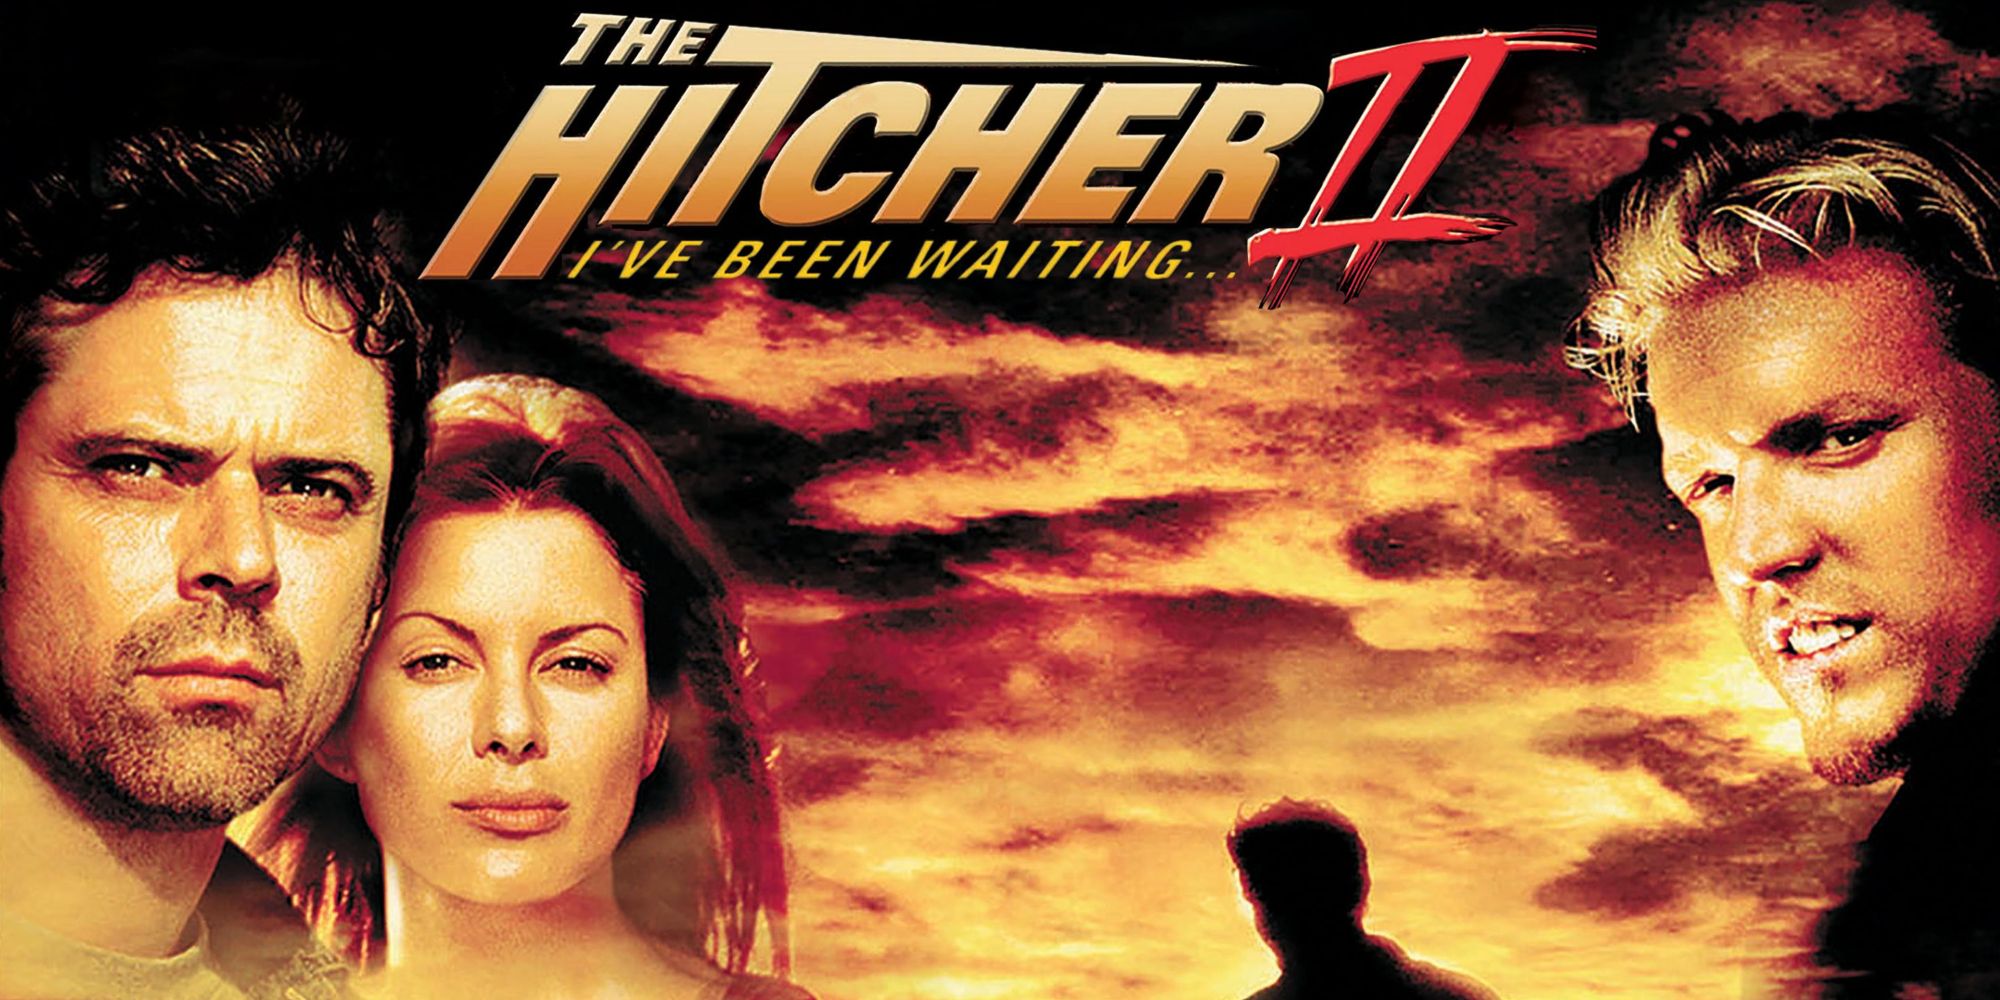 the hitcher II poster